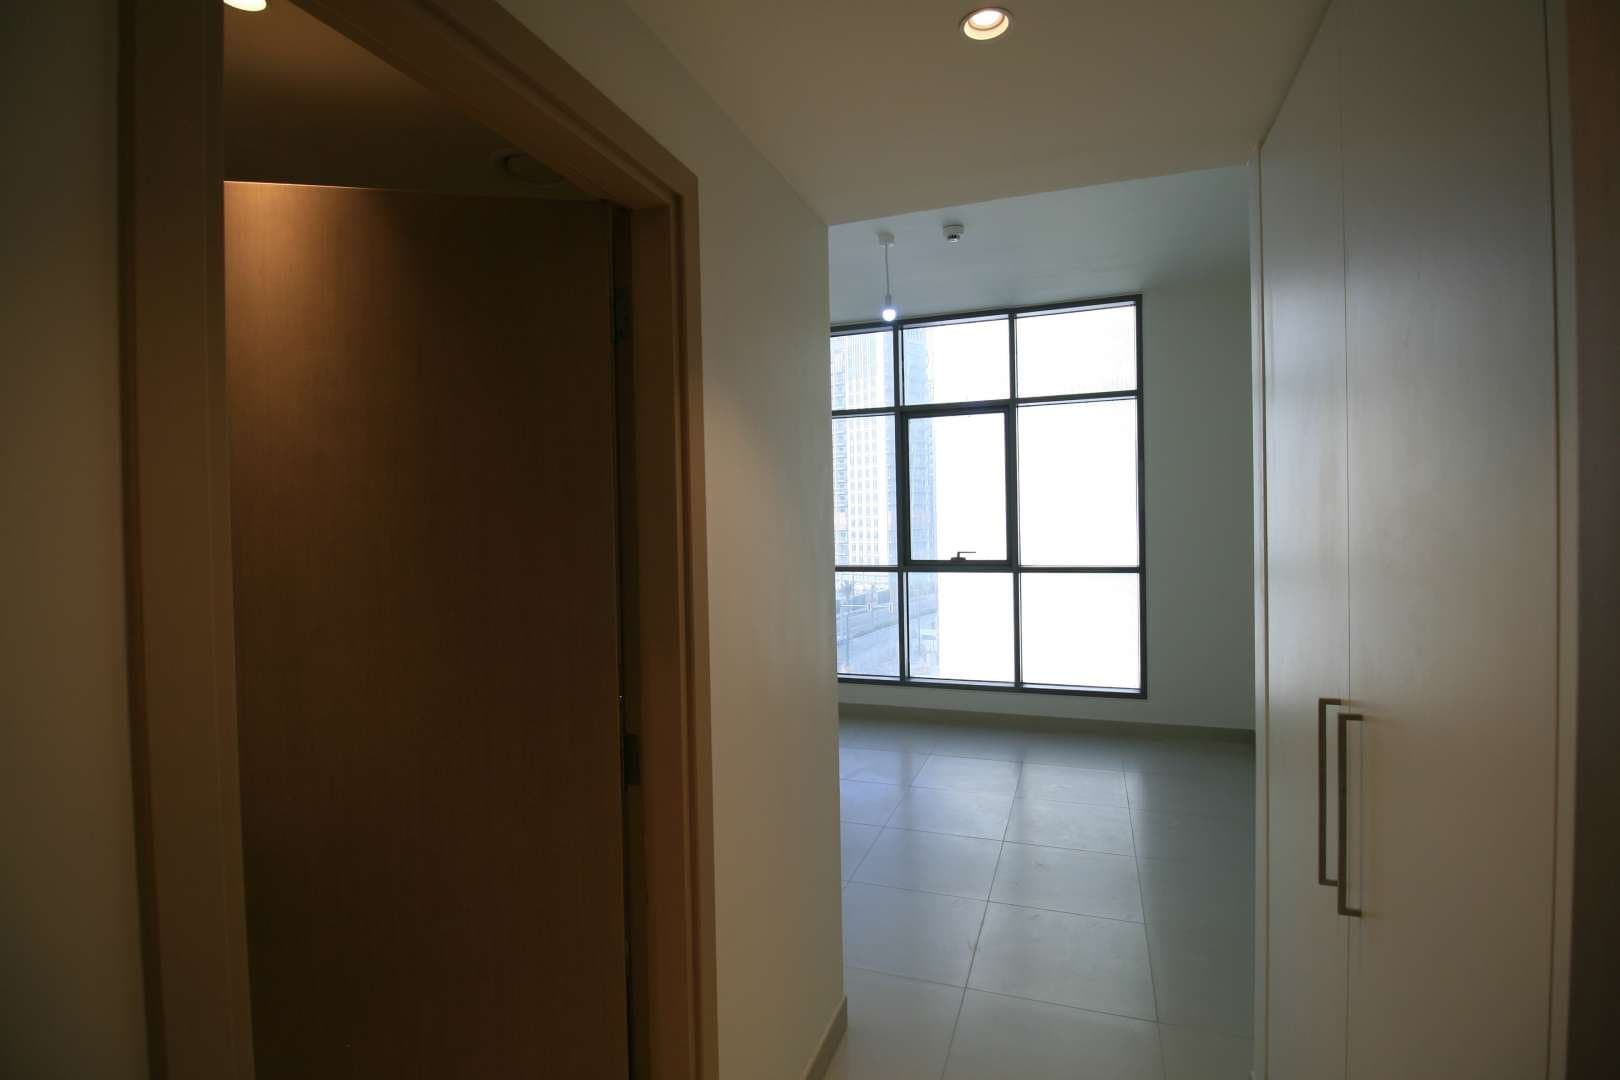 2 Bedroom Apartment For Rent Acacia Park Heights Lp05060 C027a30dc40f800.jpg